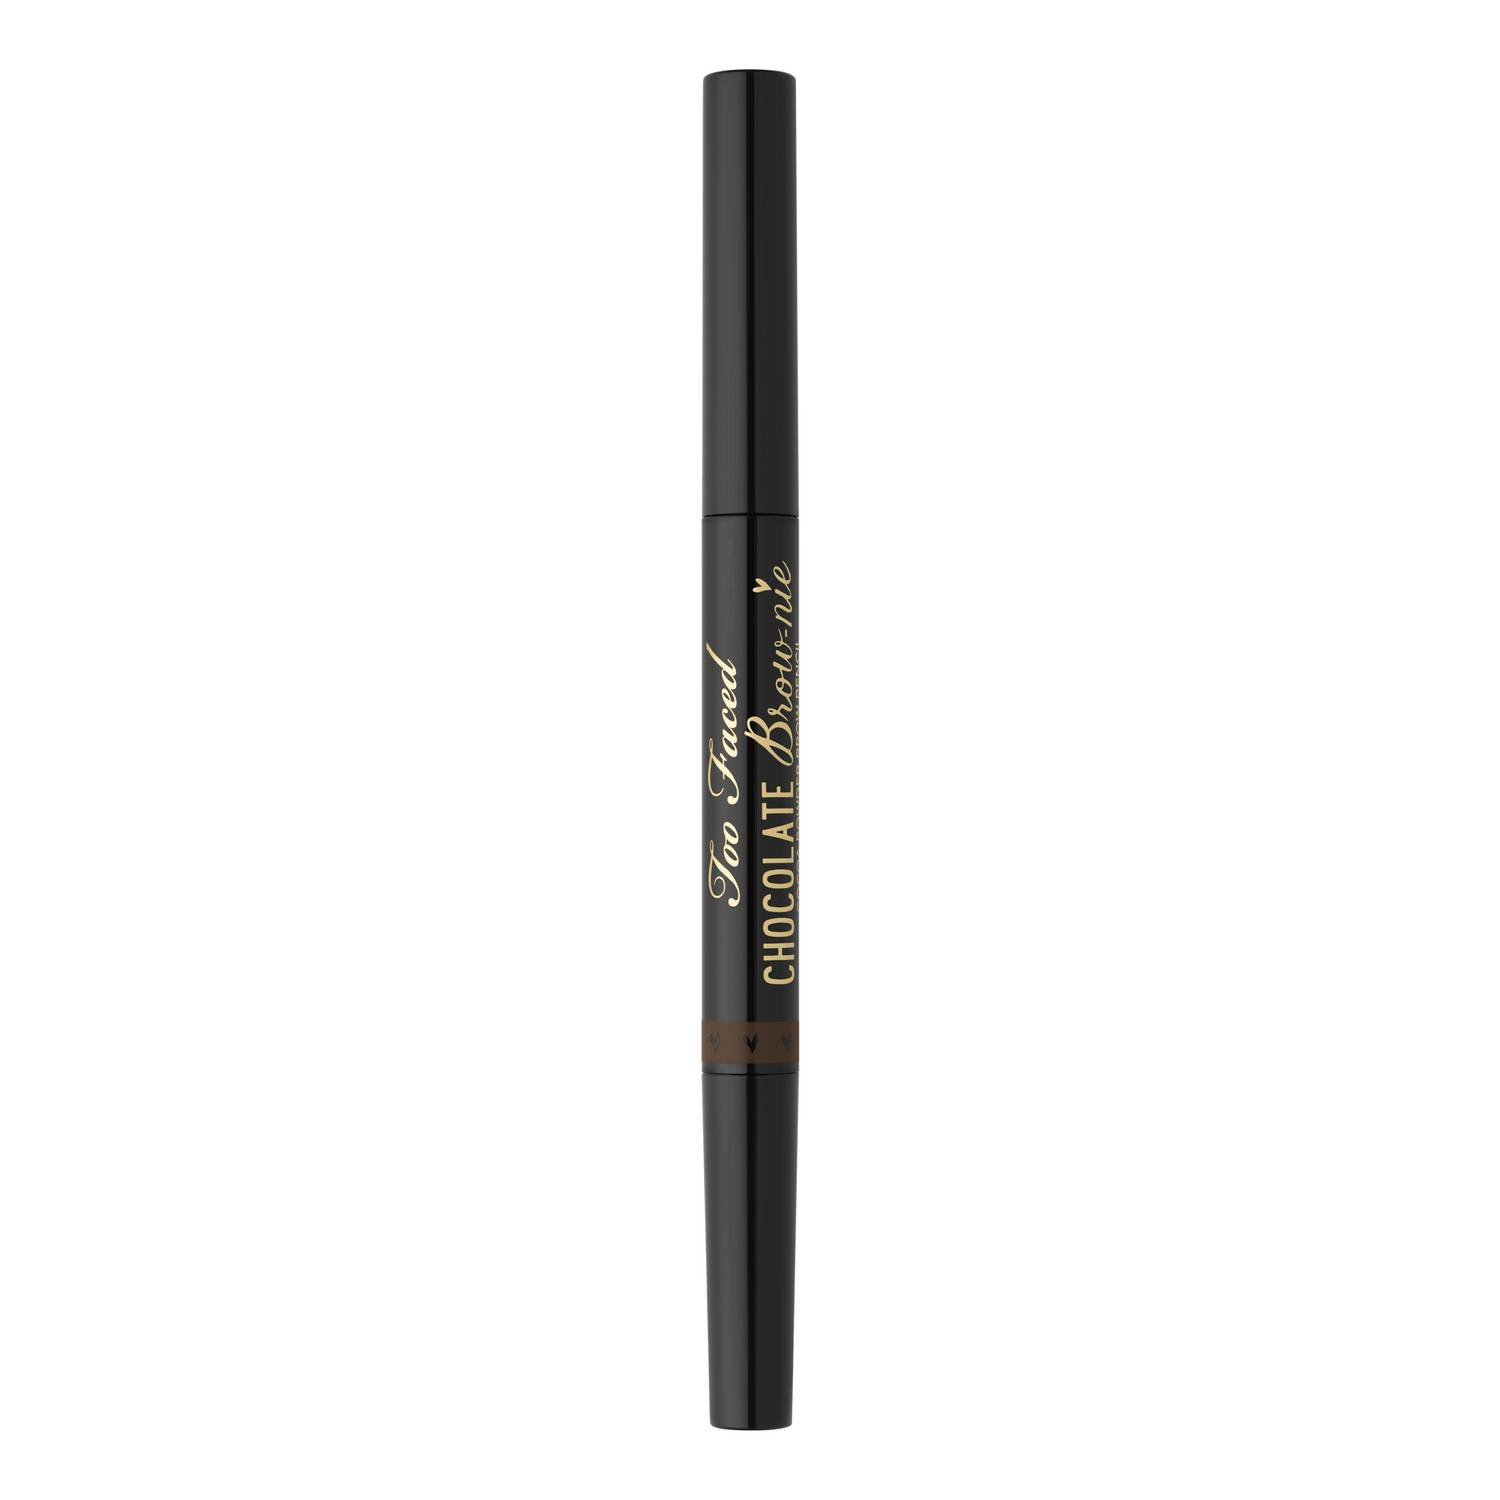 Too Faced Chocolate Brow-Nie Cocoa Powder Brow Pencil Soft Brown